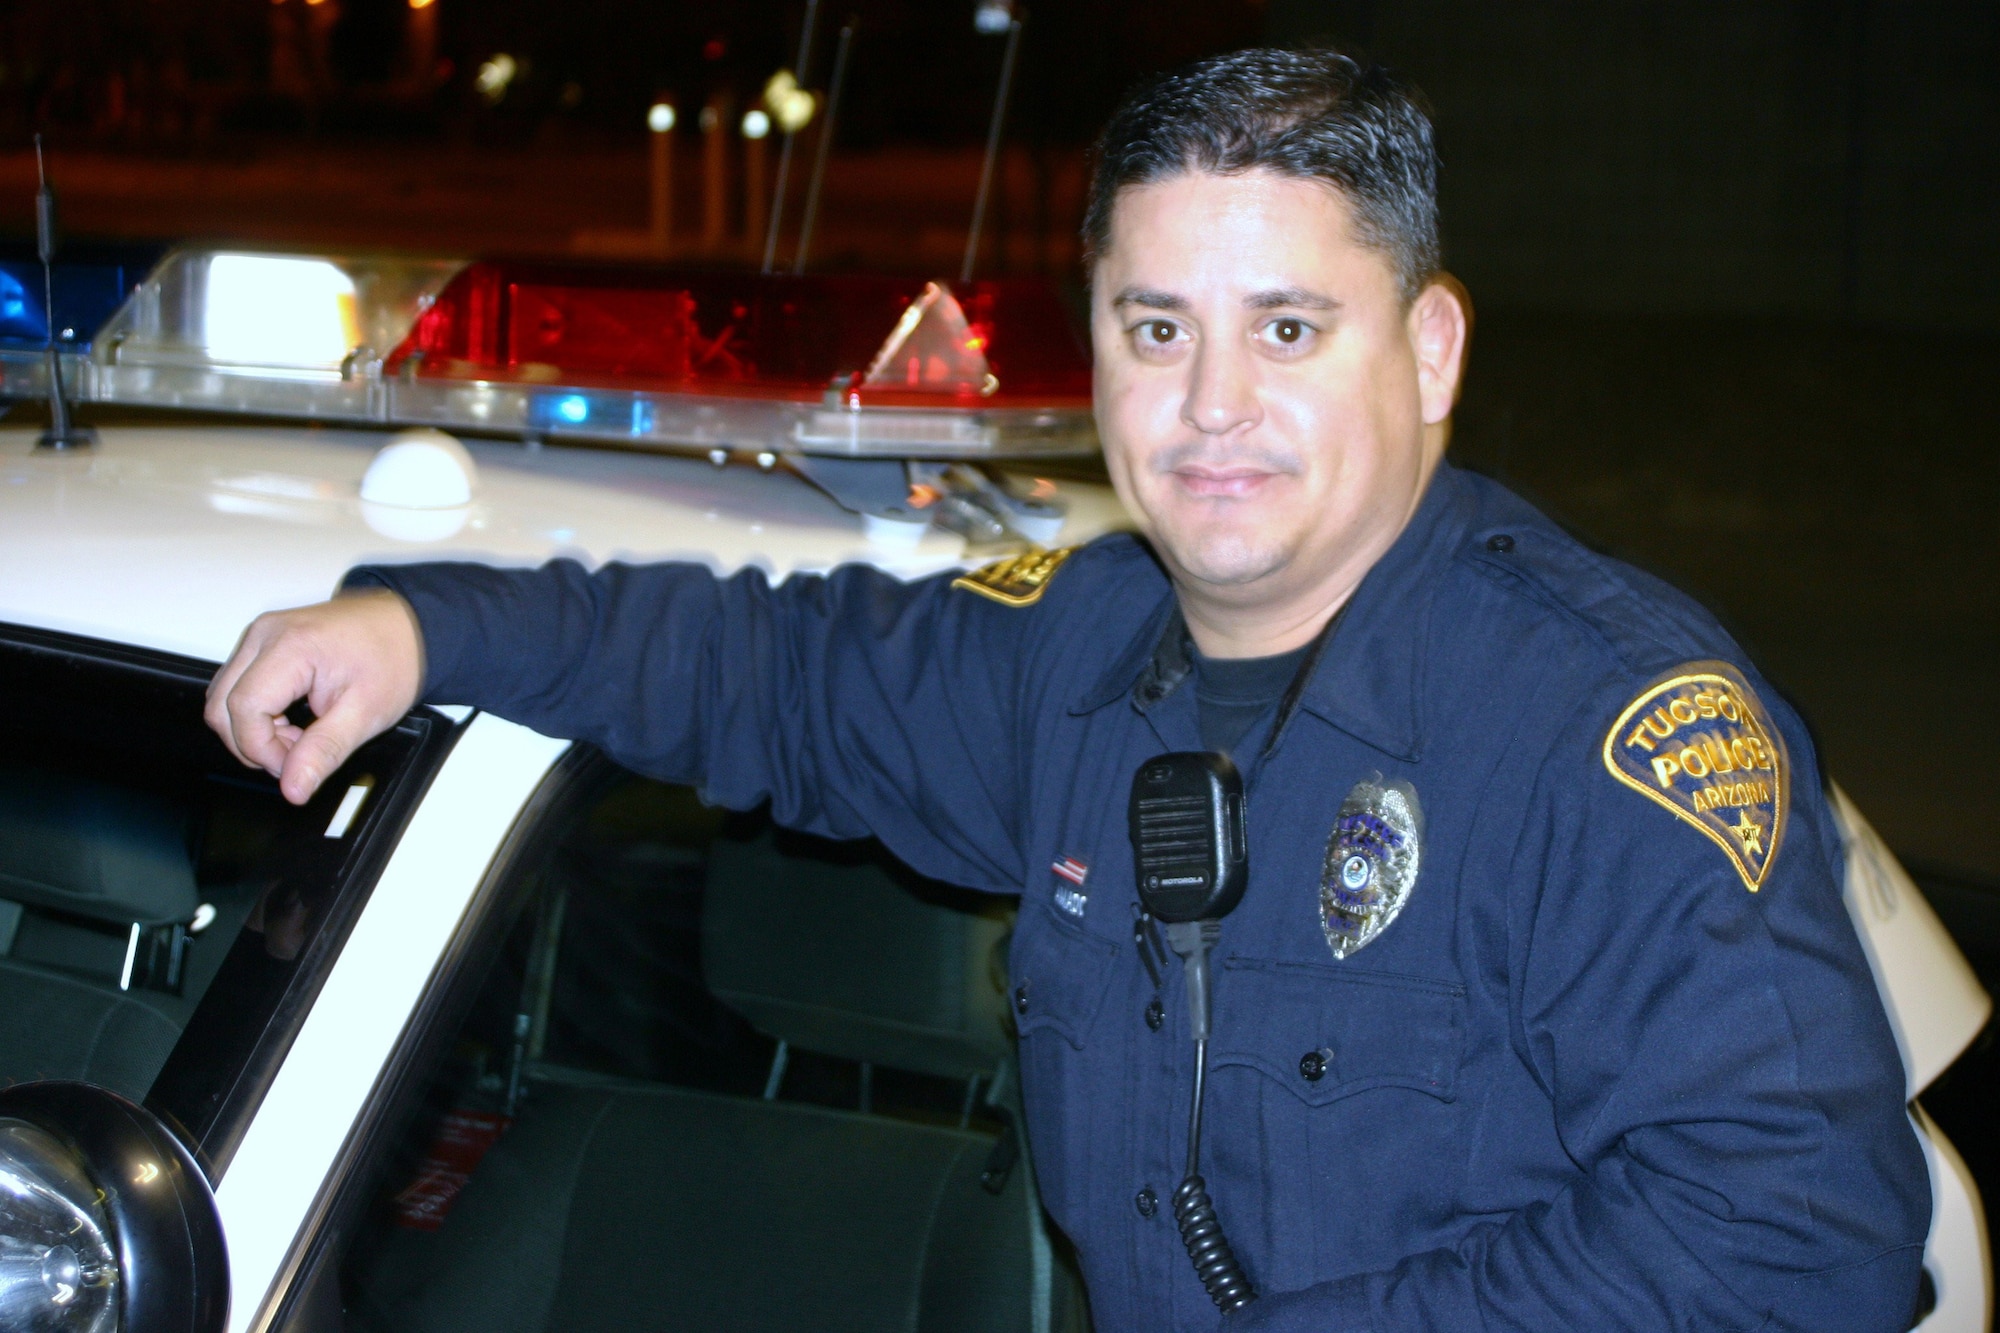 DAVIS-MONTHAN AIR FORCE BASE, Ariz. - Tucson Police Department Officer, Marcos Amado, not only serves his city, but his country as well. One weekend a month and two weeks a year he goes by Tech. Sgt. Amado and serves as a Reservist at the 943rd Rescue Group here. Both jobs, civilian and reserve, he works in the law enforcement field - as an Airmen he serves as a combat arms training and maintenance (CATM) instructor. He admits it's a balancing act at times when he has a long shift, attends a Unit Traning Assembly and then reports back for his police job at the end of a weekend. Having a positive attitude keeps him in good graces with both his military and police supervisors. (U.S. Air Force photo/Maj. Aaron Milner)